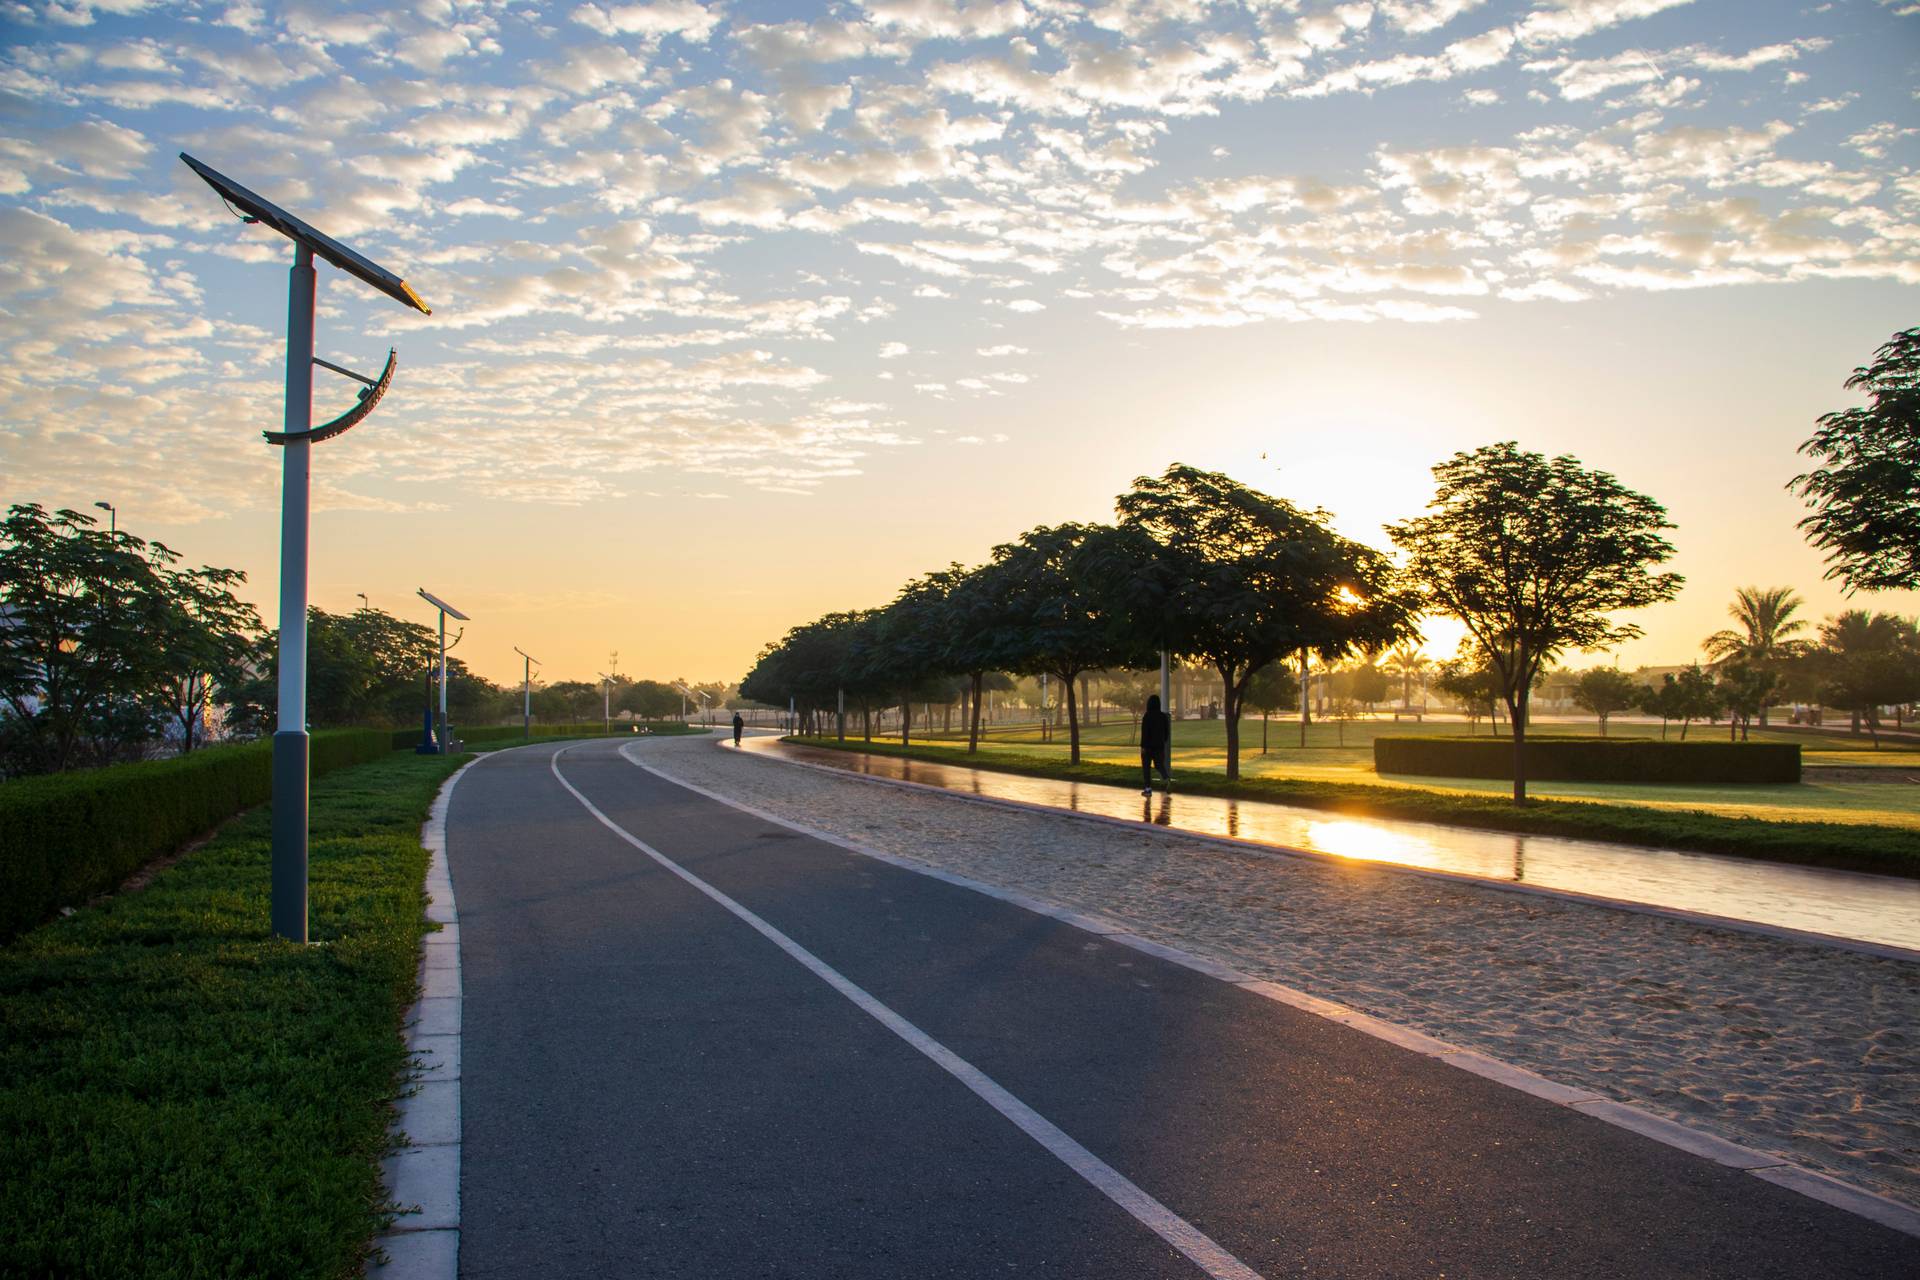 Jogging and cycling tracks in Al Warqa park, Dubai, UAE early in the morning